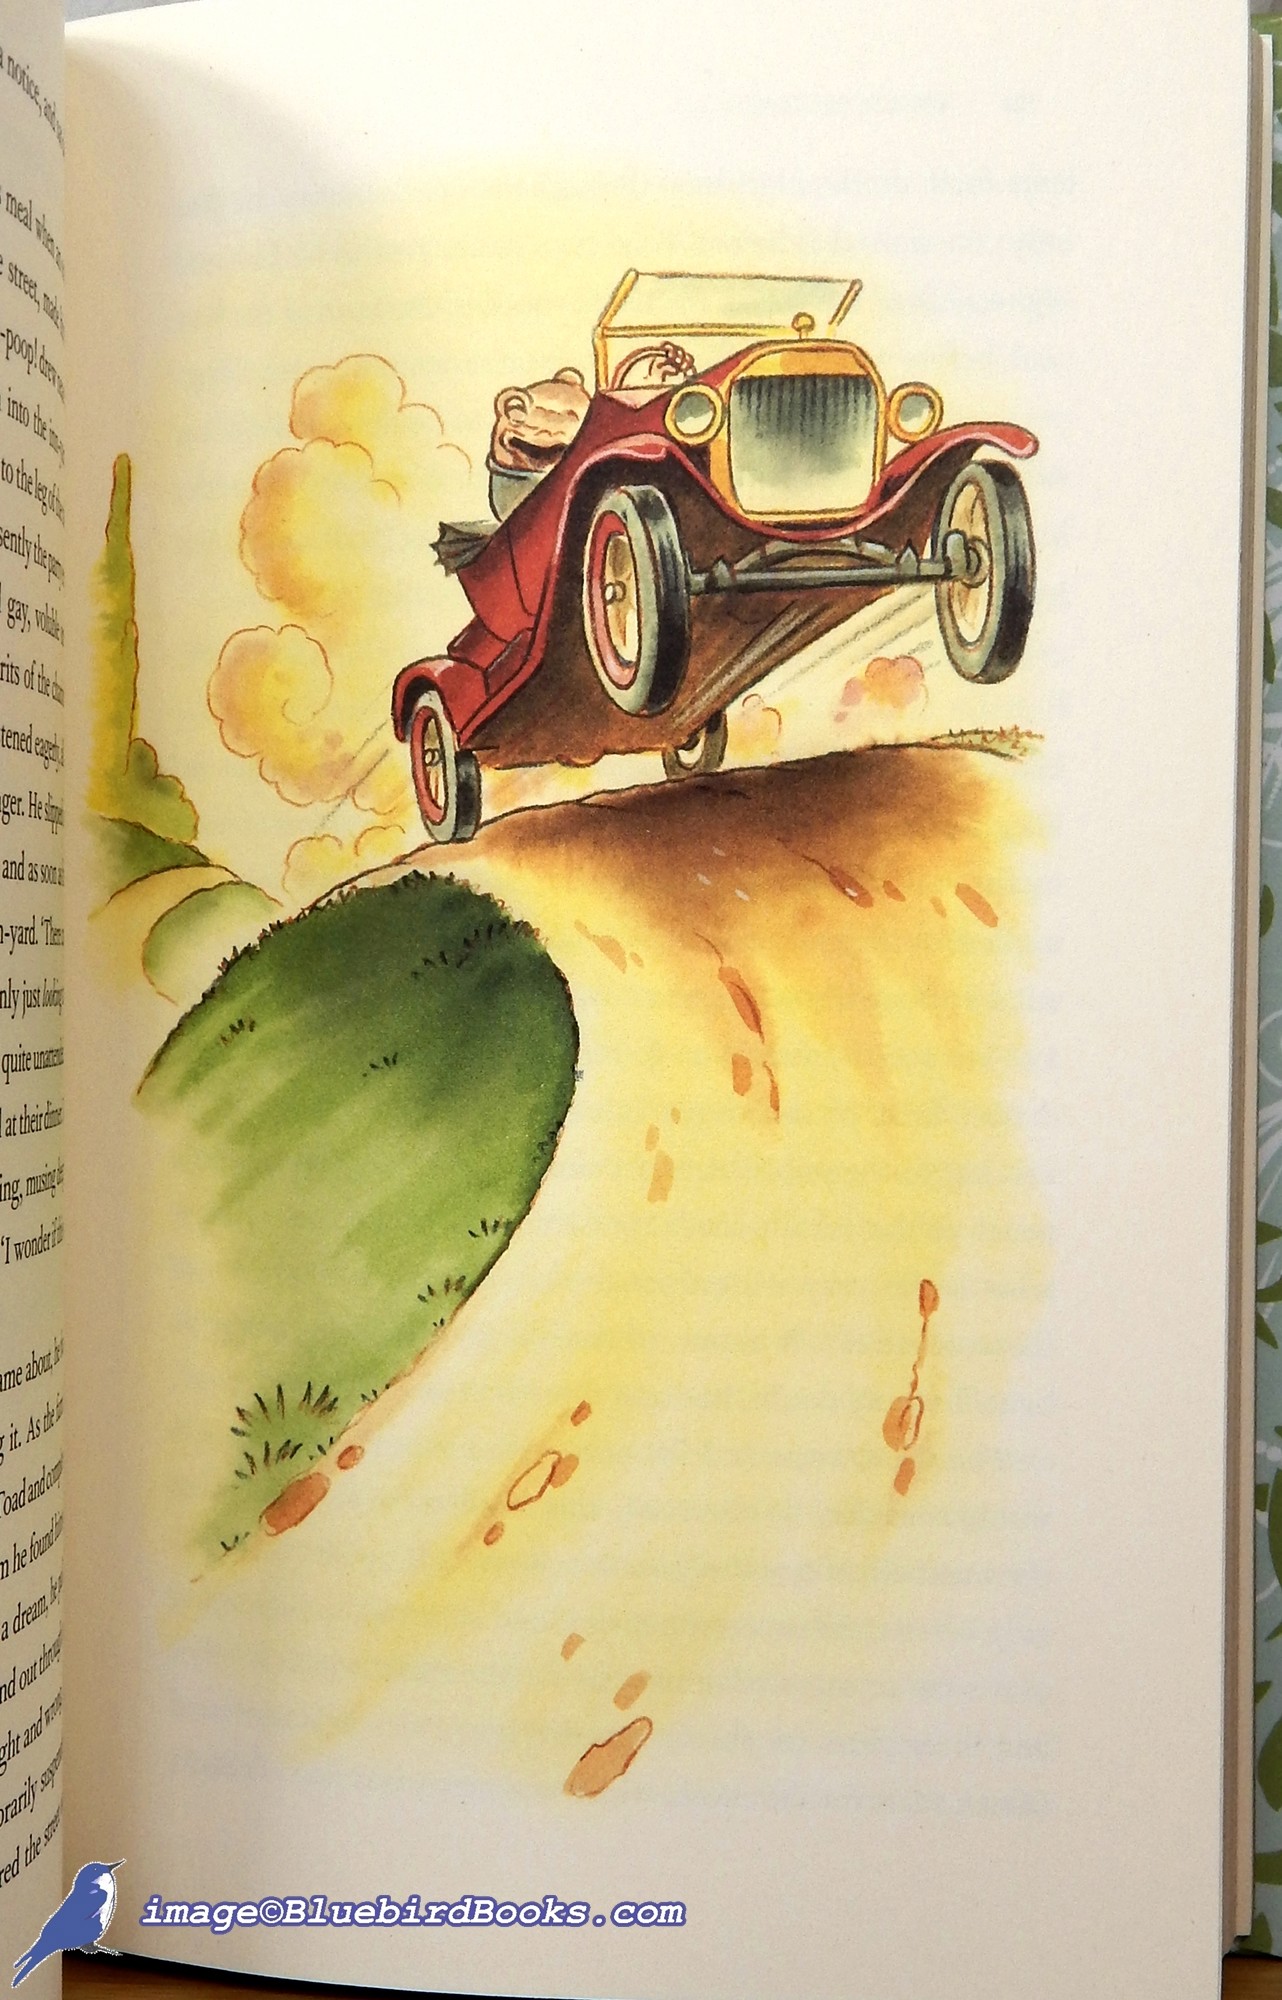 GRAHAME, KENNETH (AUTHOR); MACDONALD, ROSS (ILLUSTRATIONS) - The Wind in the Willows